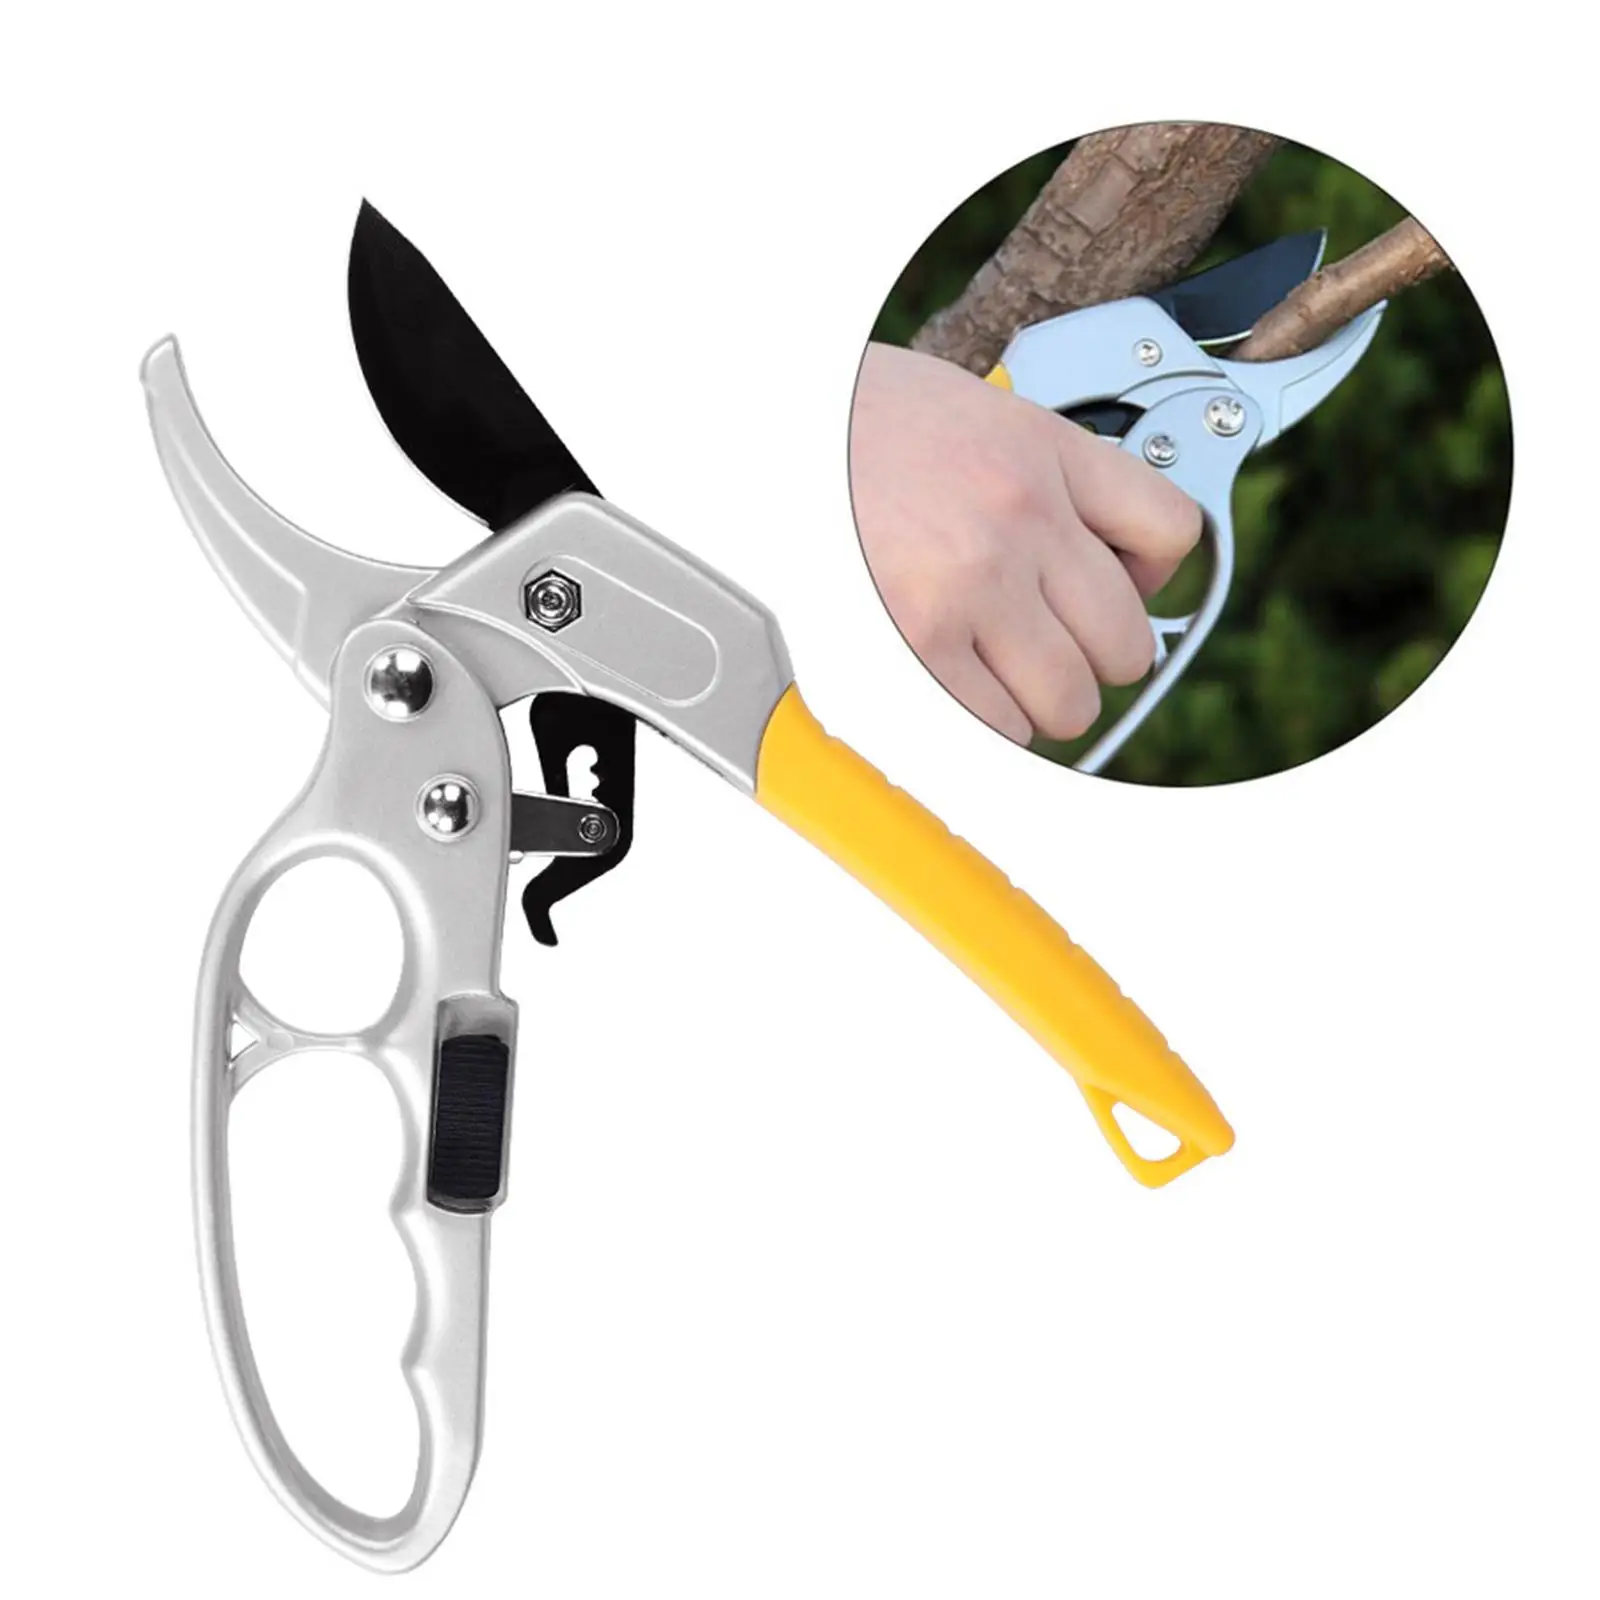 Garden Pruning shear, pruners shear, Angled Hand pruners Trimmer Scissors for Orchard